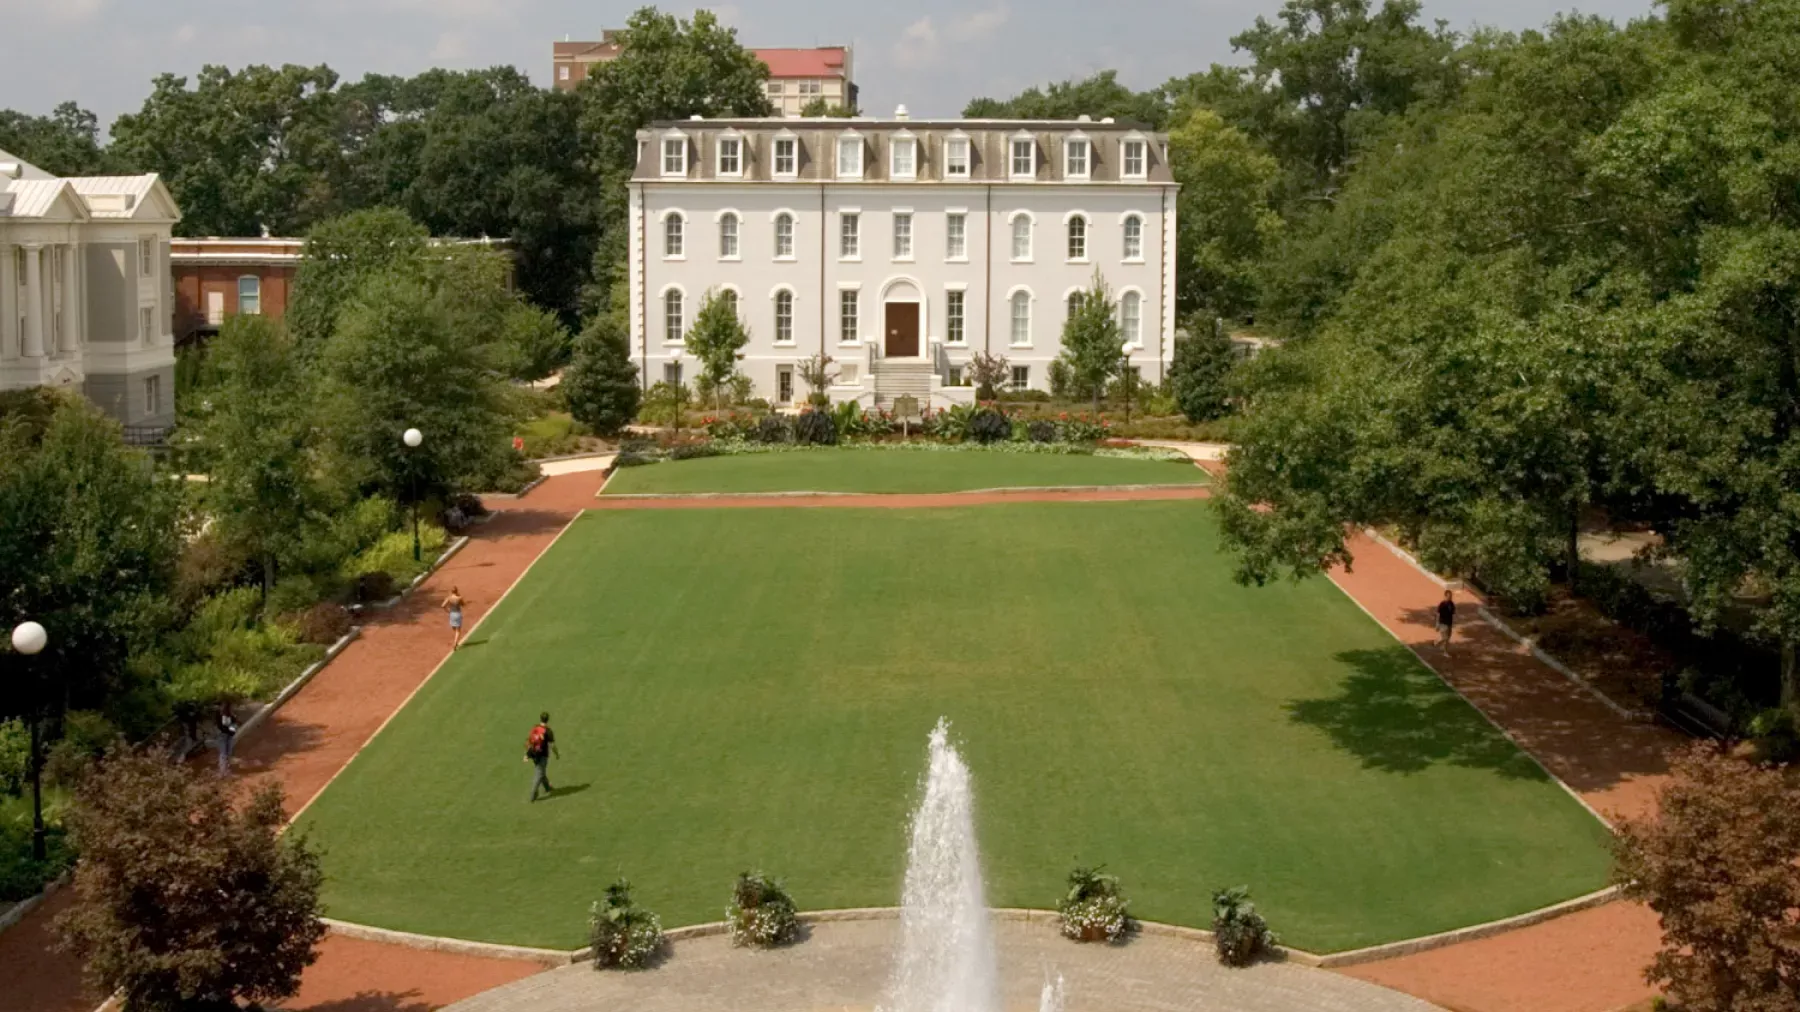 Aerial view of a university campus showing a large, well-manicured lawn bordered by brick pathways. In the background is a stately, white three-story building with multiple windows. A central fountain is in the foreground, and a few people walk along the paths.